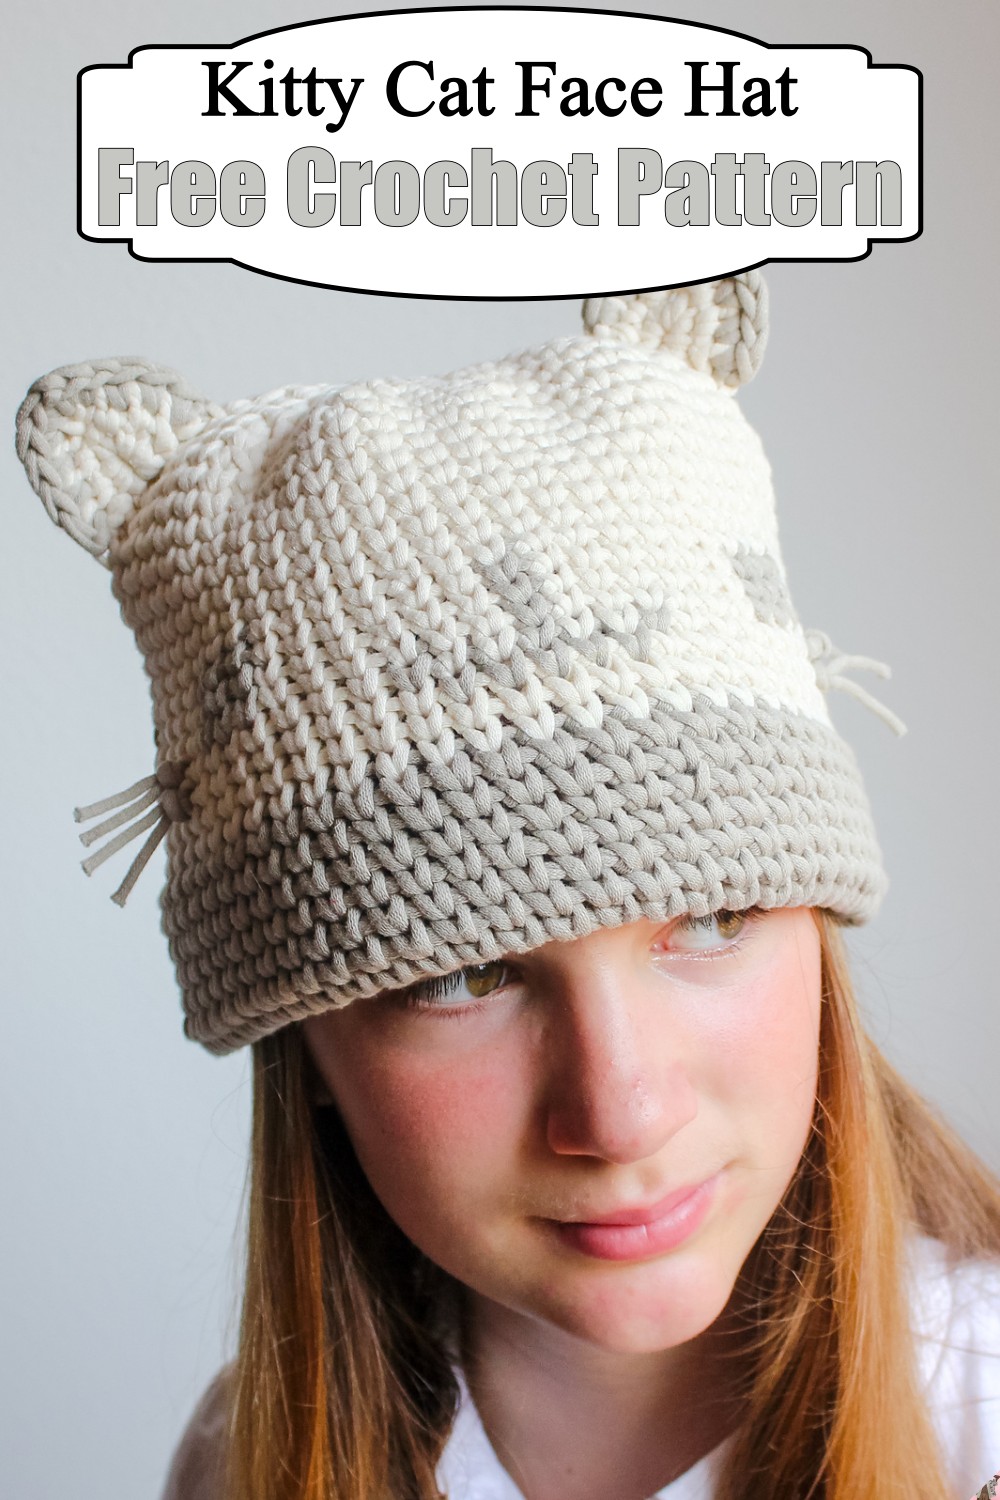 Kitty Cat Face Hat